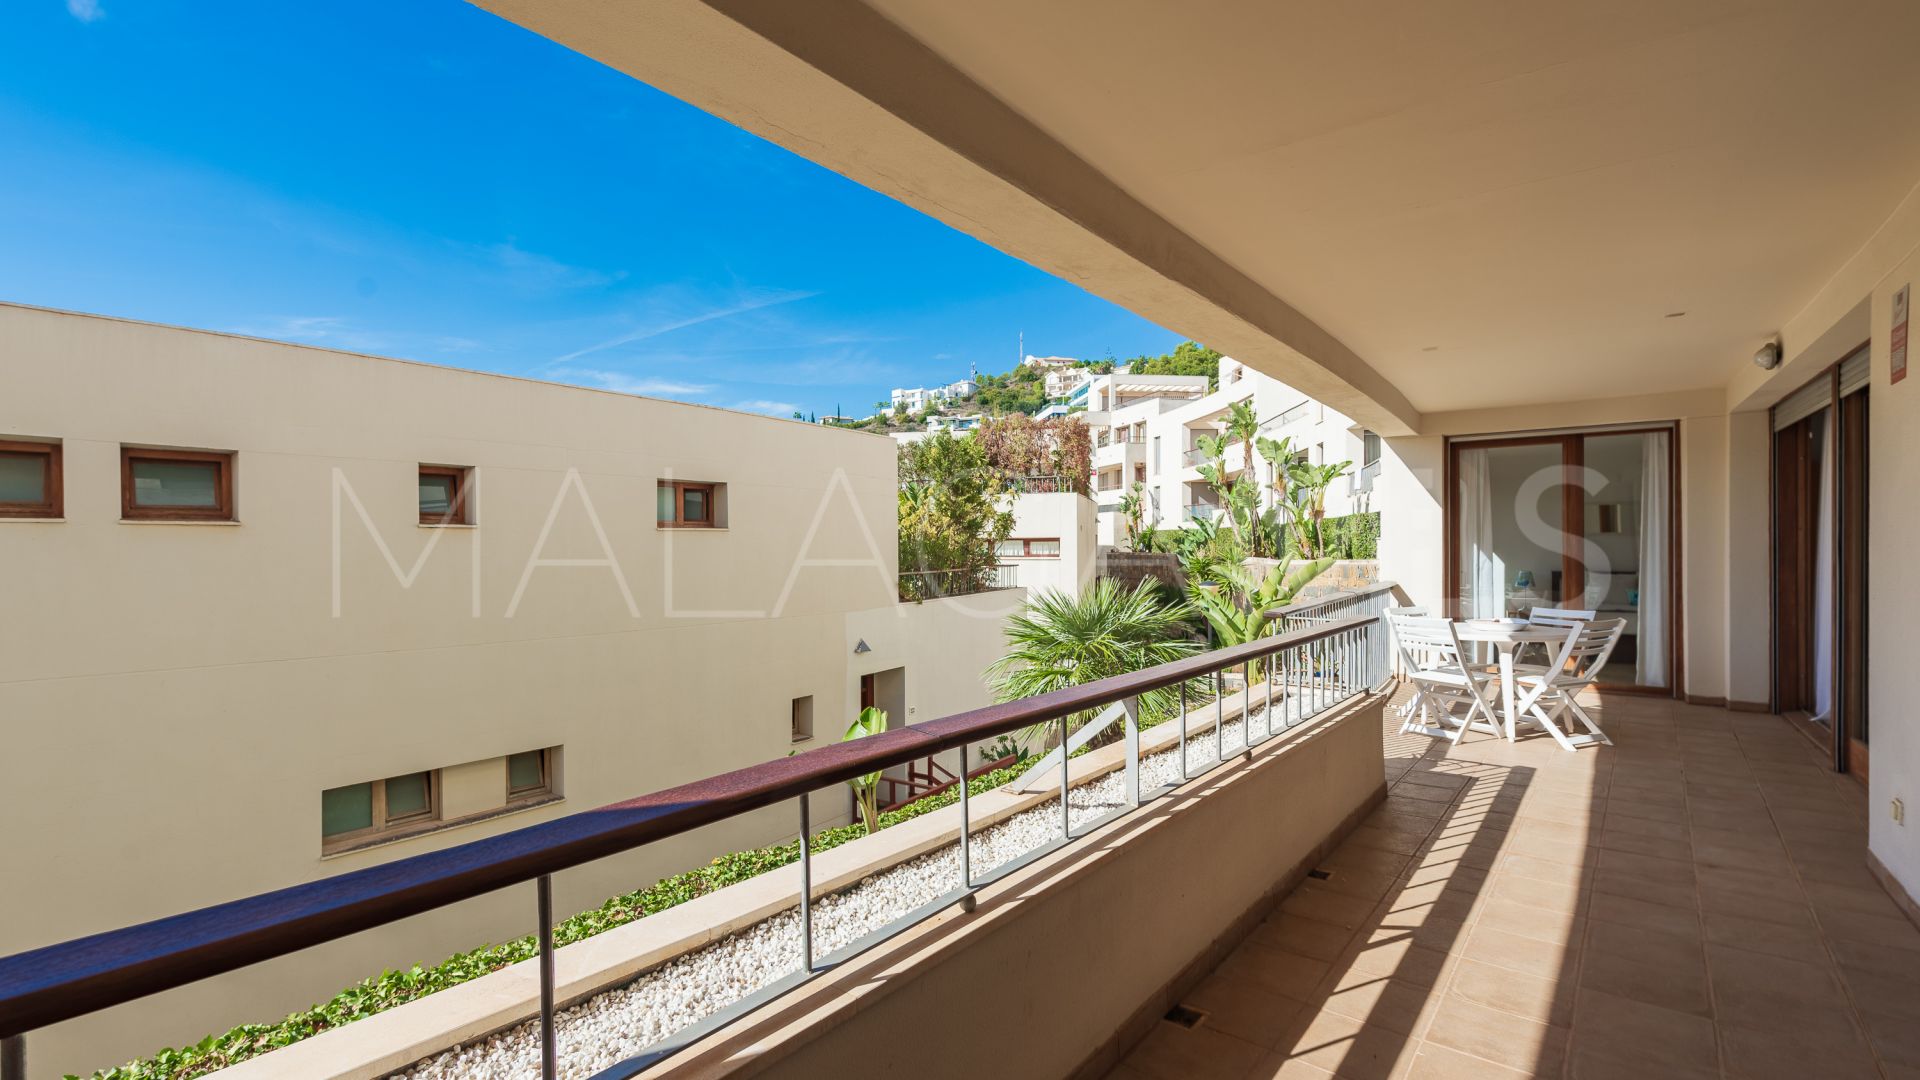 For sale apartment in Marbella with 3 bedrooms